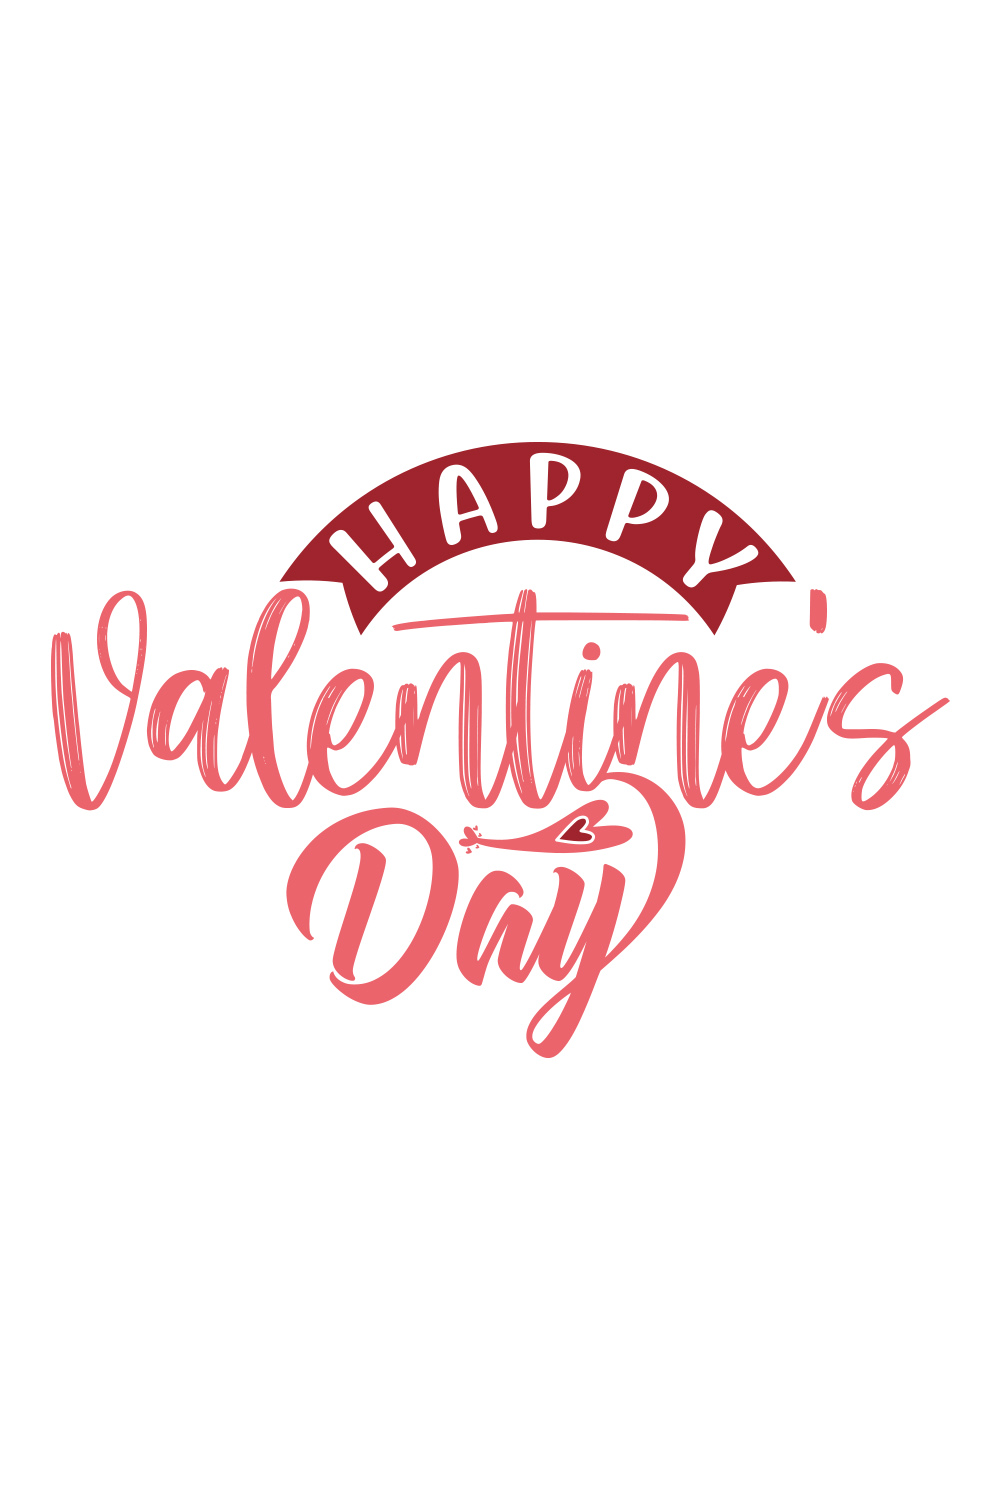 An image with a great printable Happy Valentines Day lettering